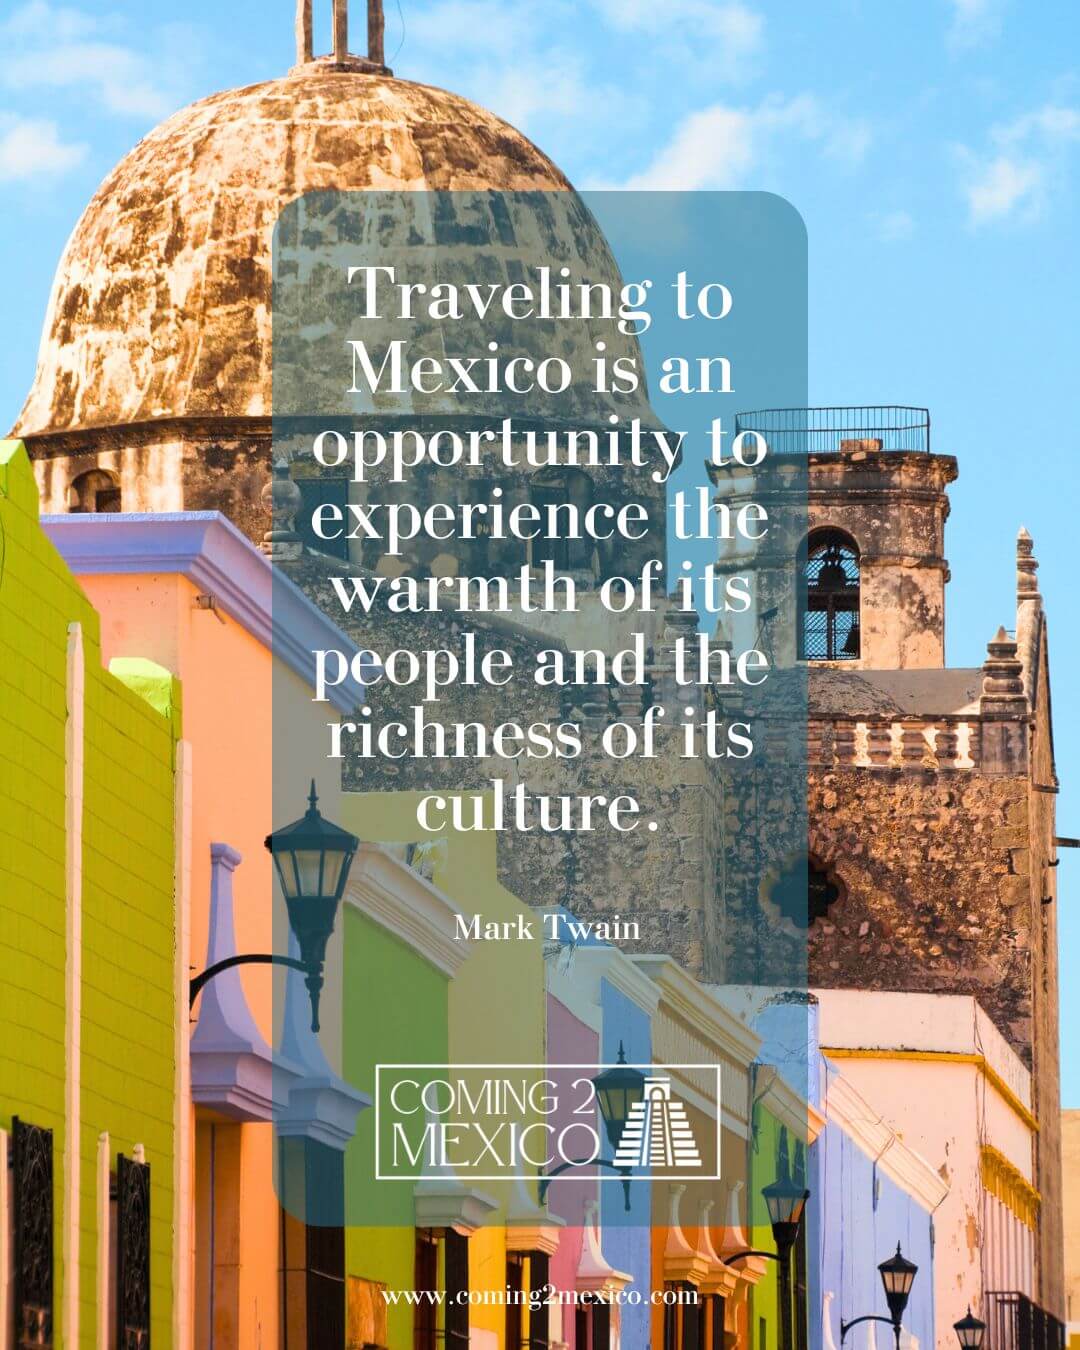 “Traveling to Mexico is an opportunity to experience the warmth of its people and the richness of its culture.” – Mark Twain